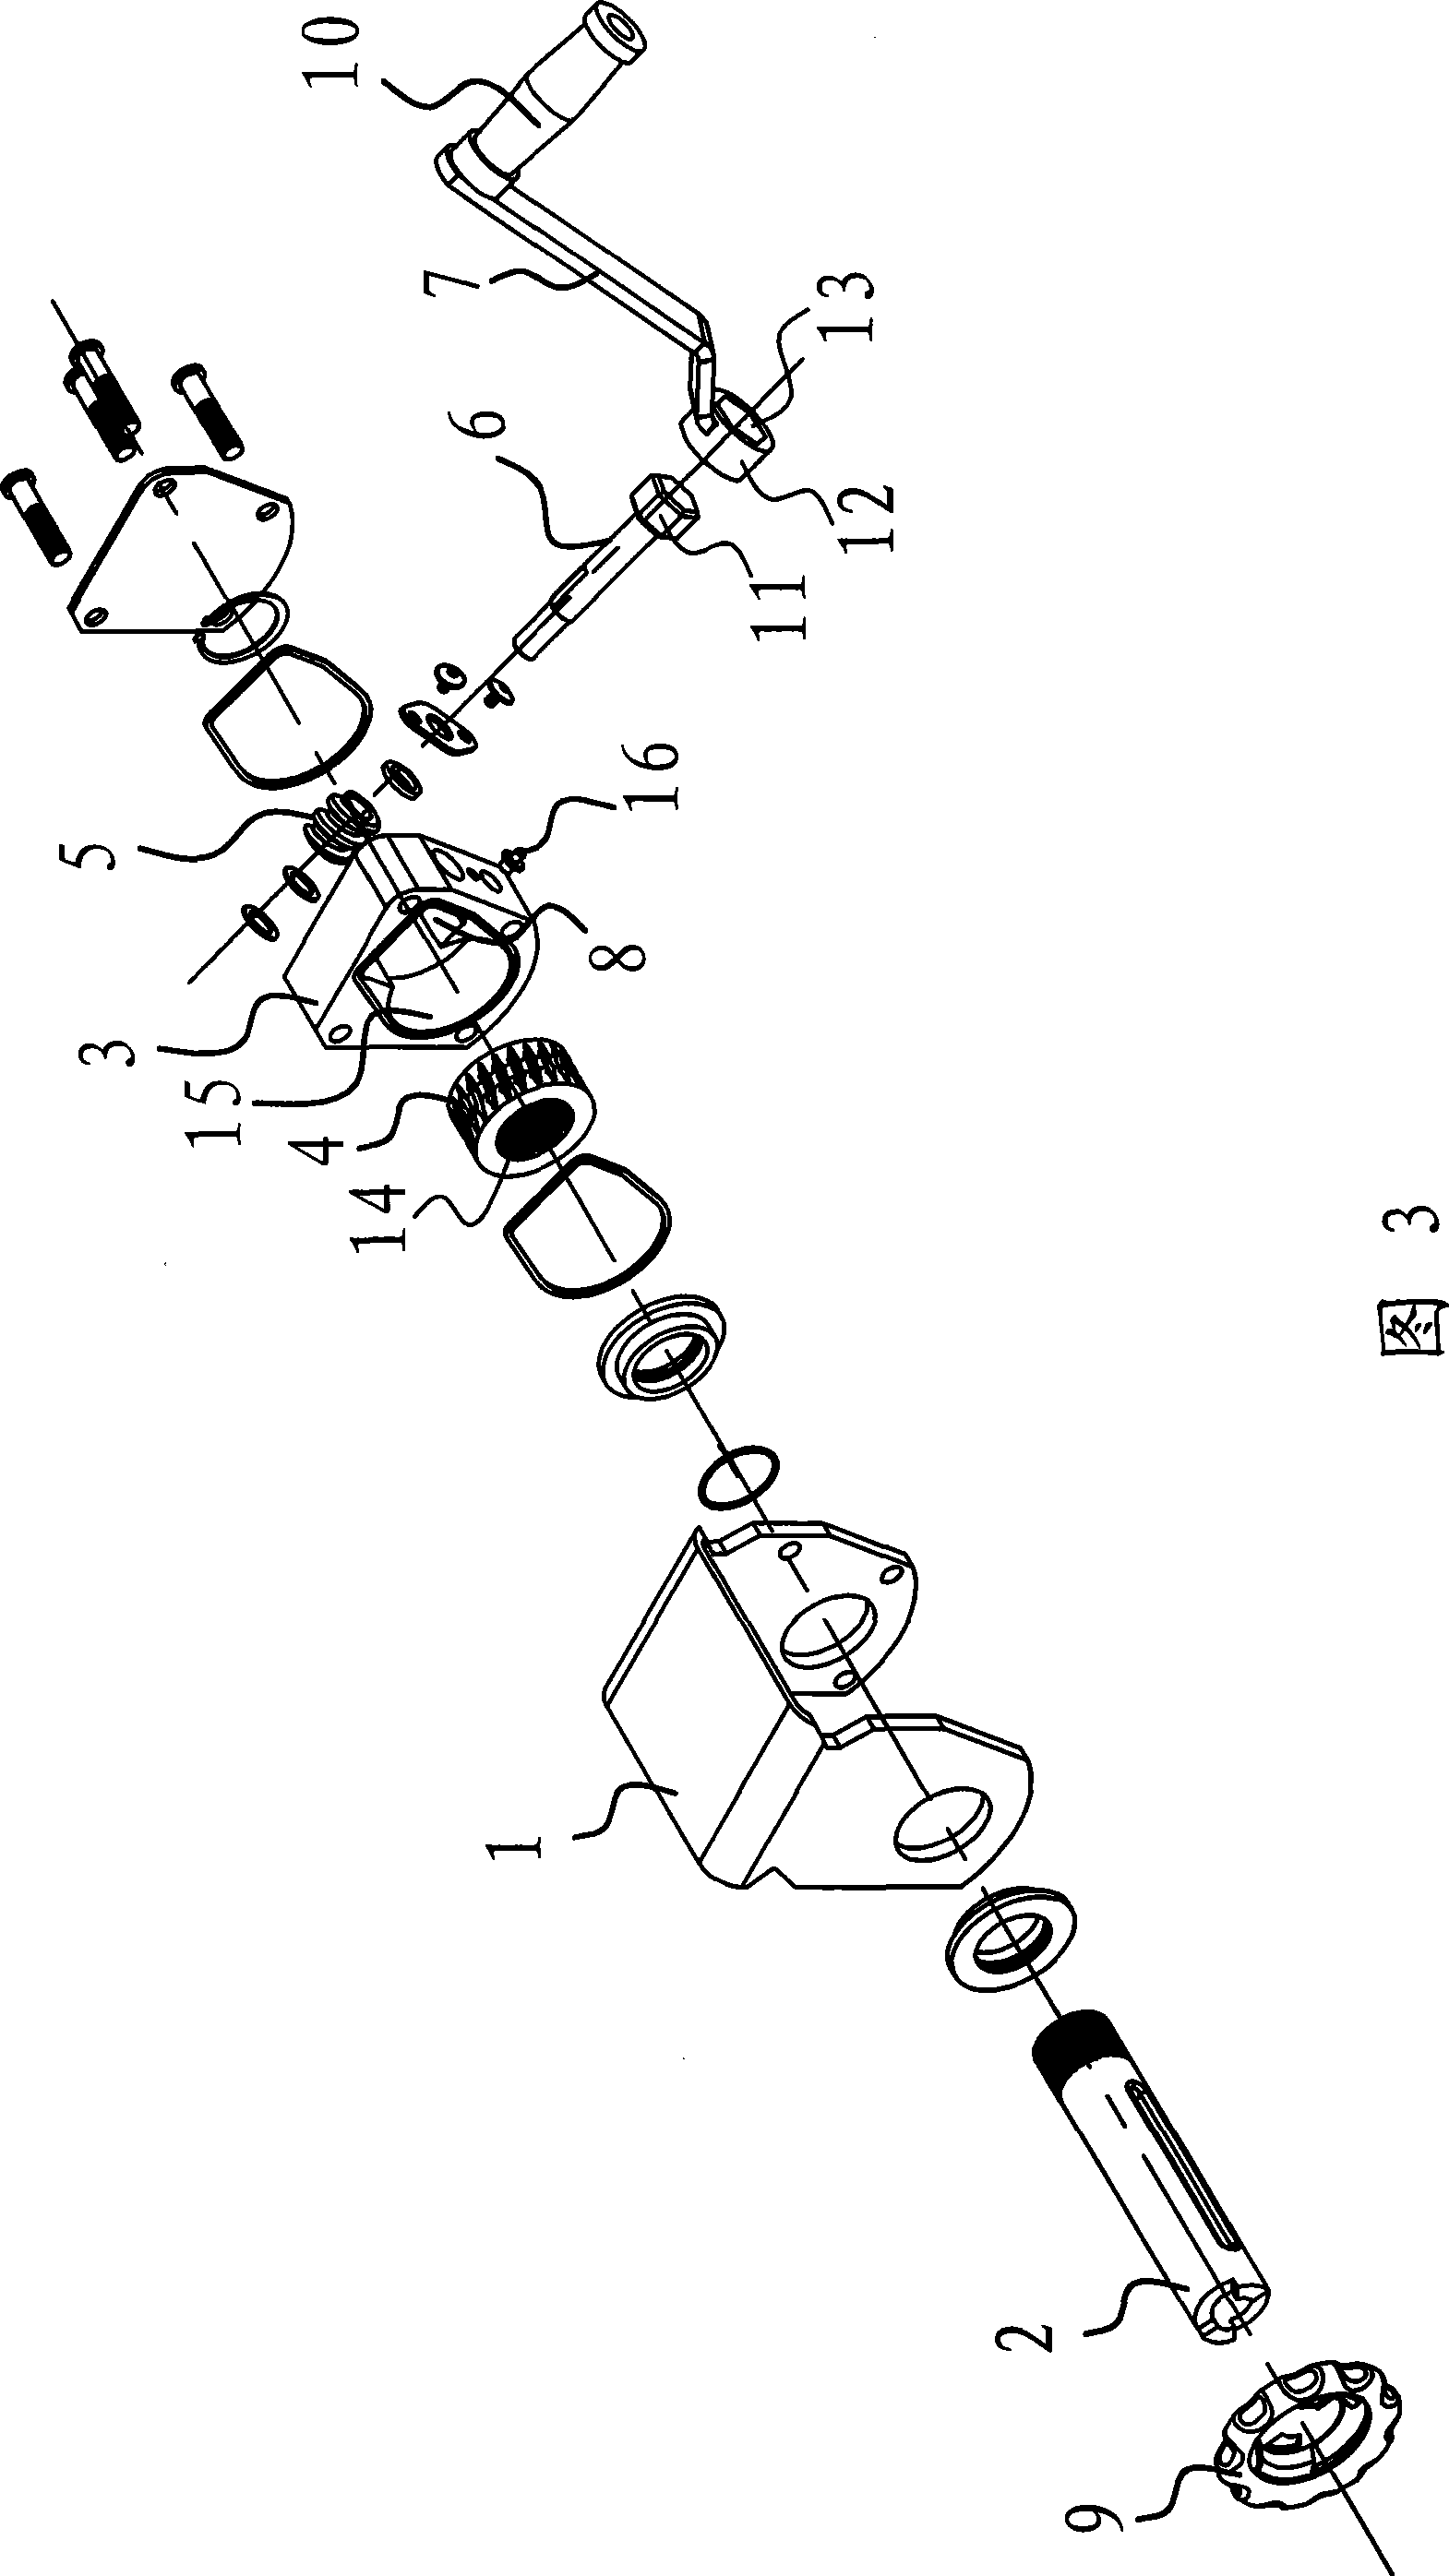 Tape spool control device of hauling winch